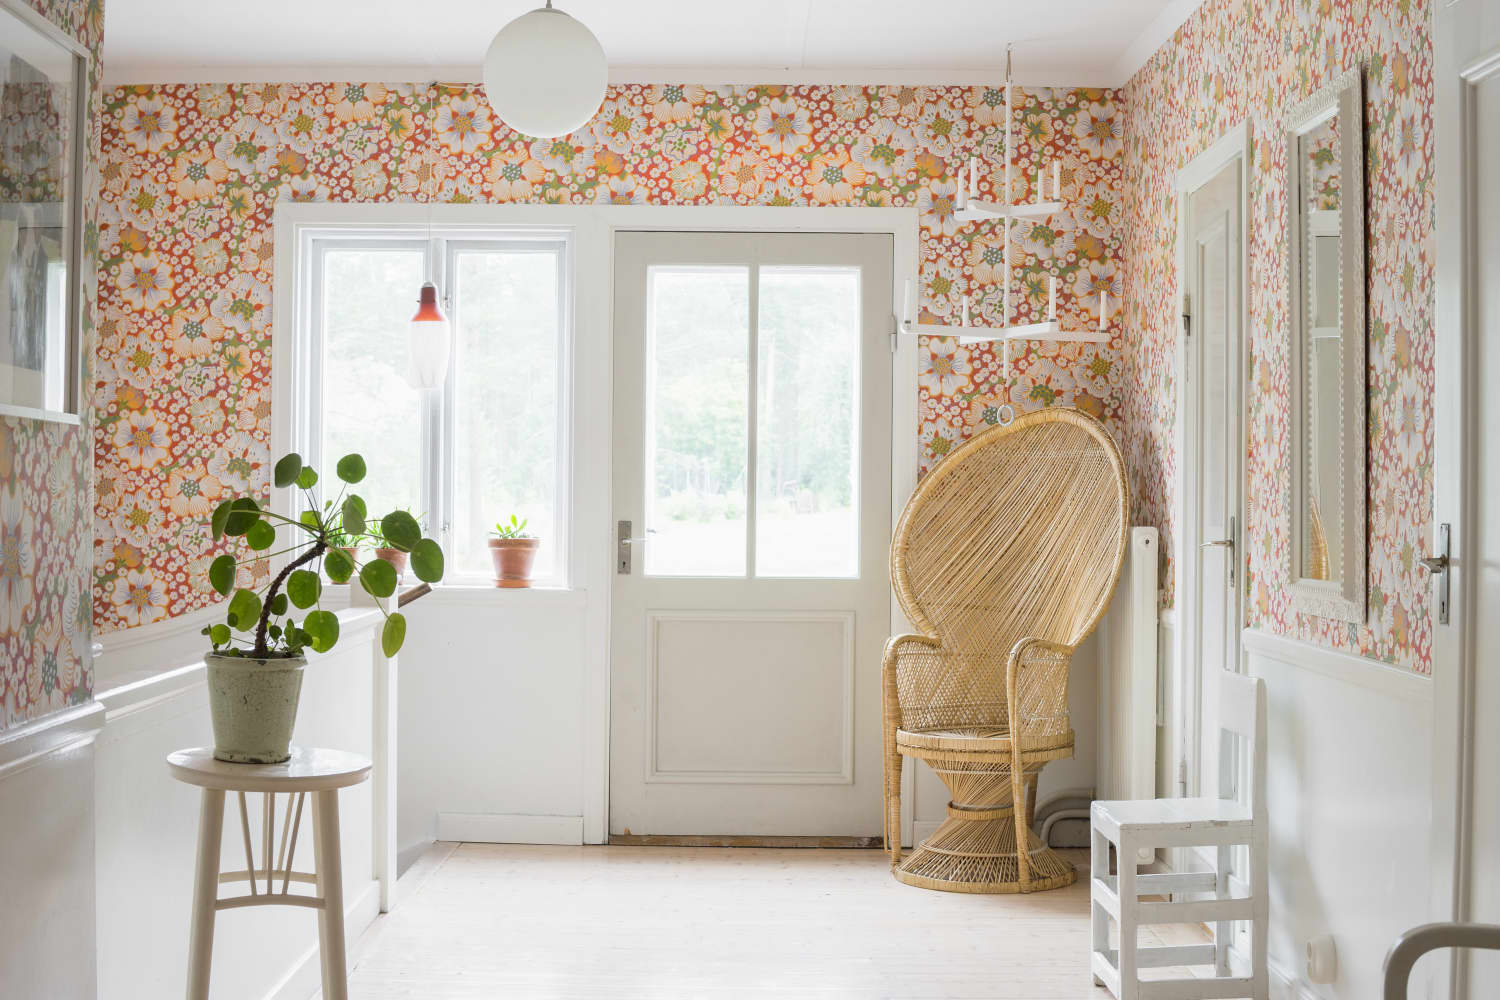 How To Choose Non-Toxic Paint and Wallpaper